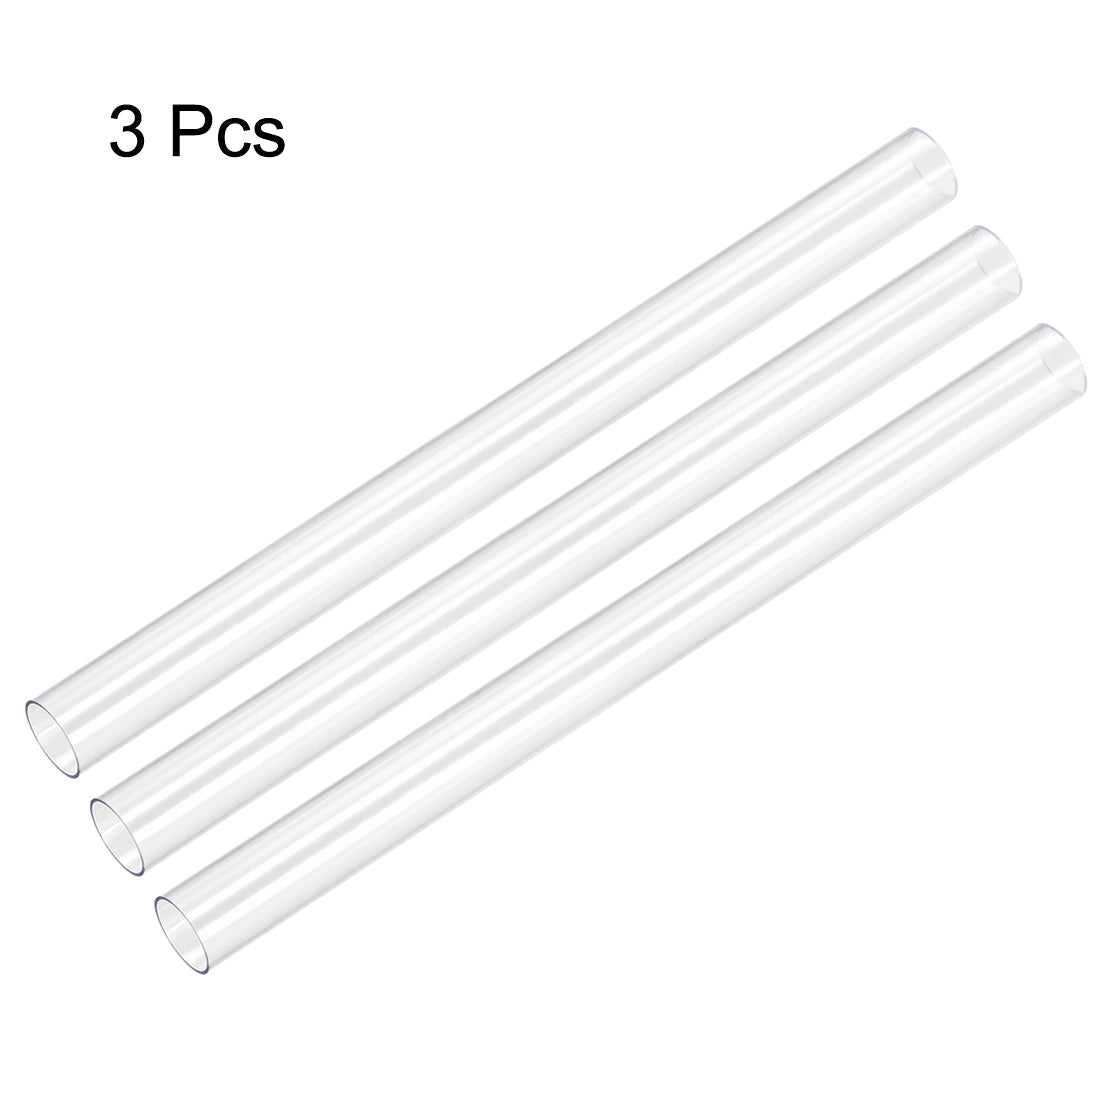 uxcell Uxcell PVC Rigid Round Tubing,Clear,12mm ID x 13mm OD,0.5M/1.64Ft Length,3pcs